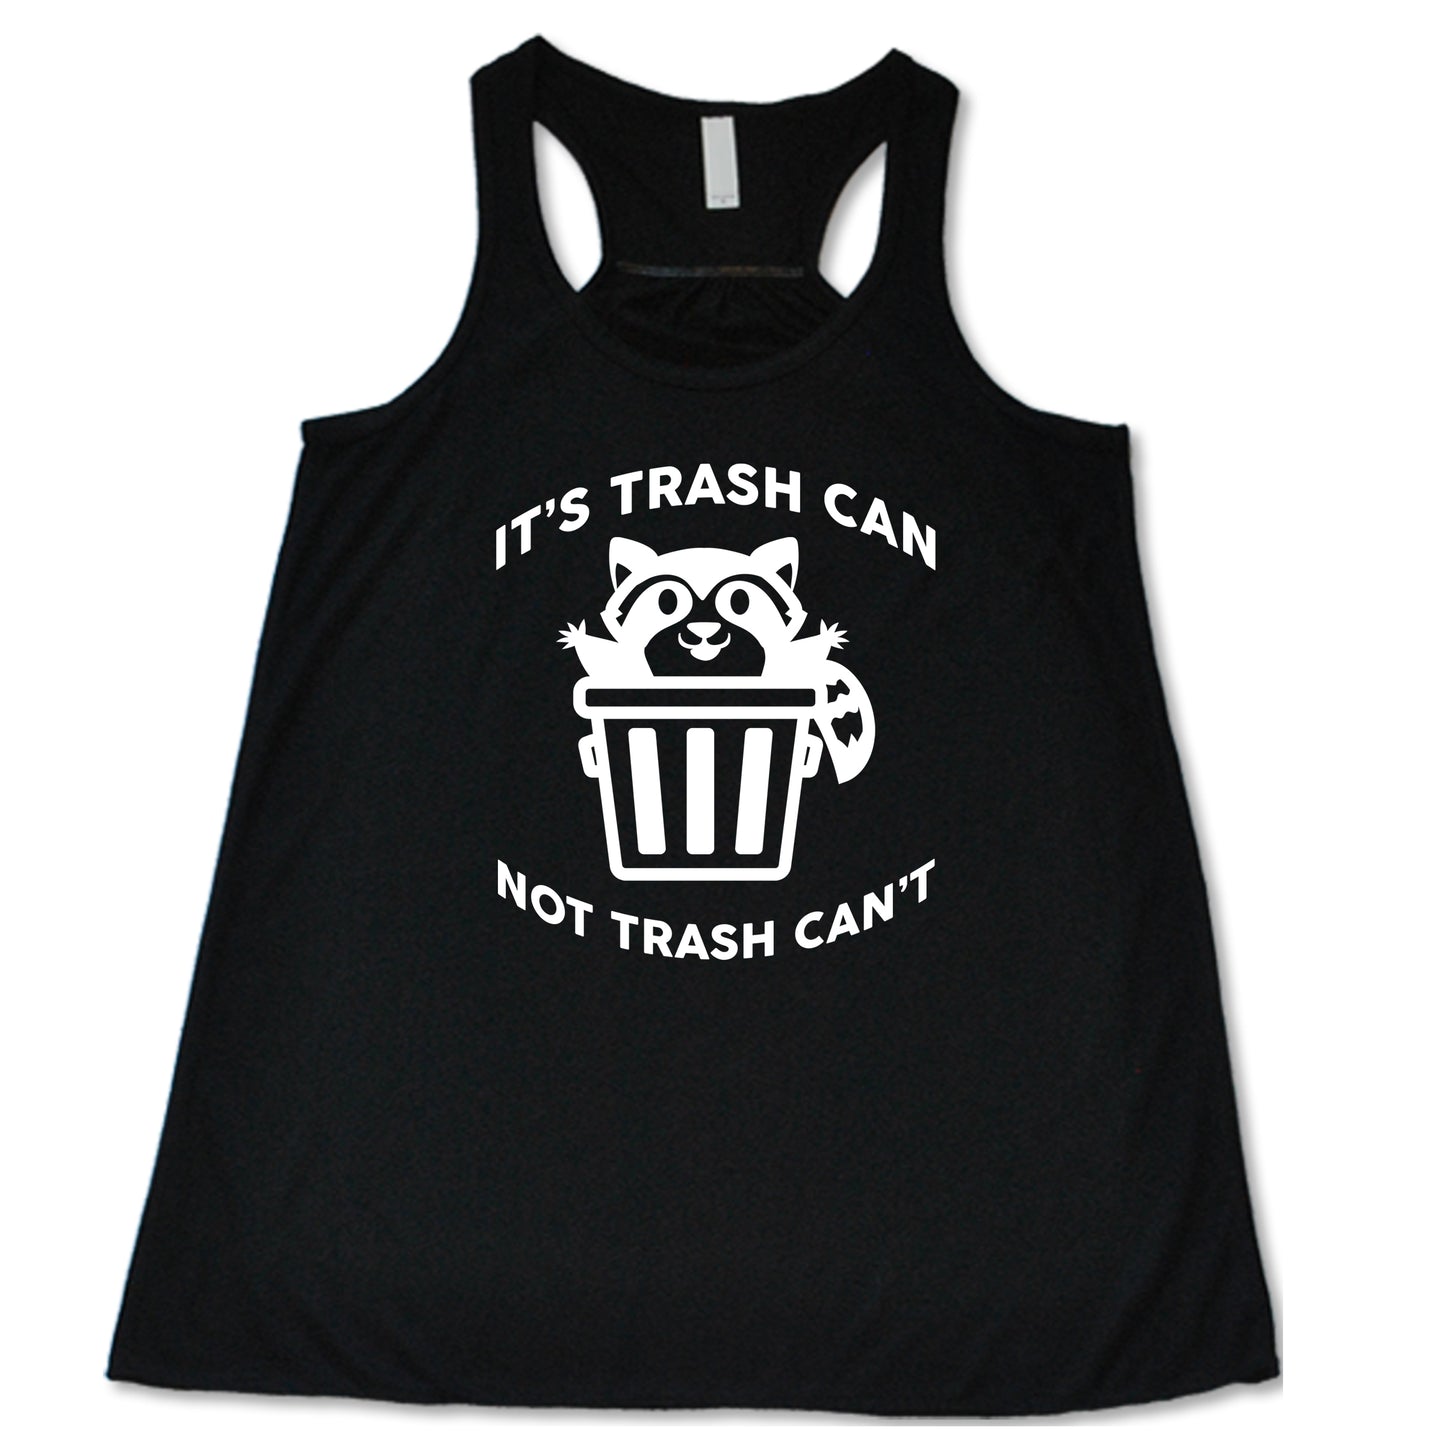 It's Trash Can Not Trash Can't Shirt